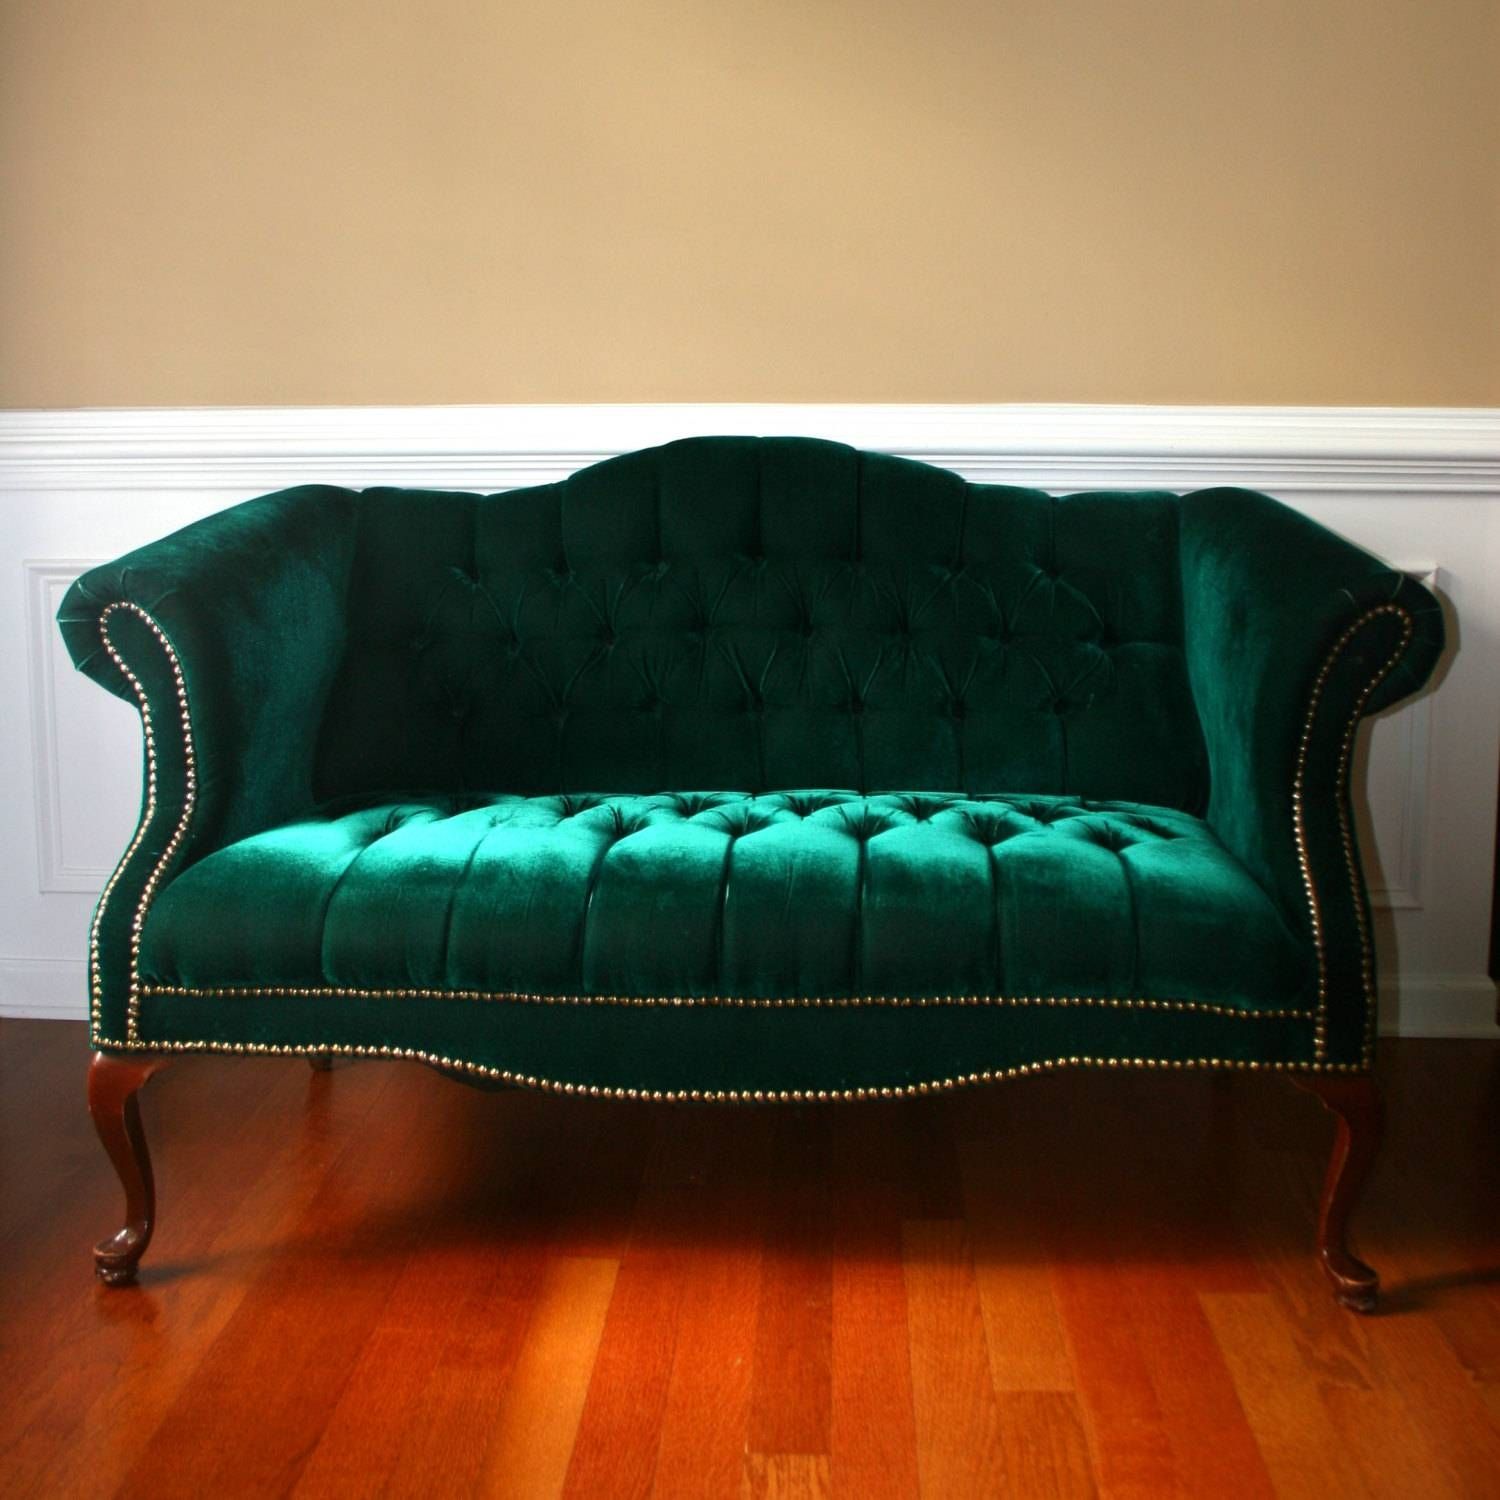 Tufted Velvet Sofa Furniture | Tehranmix Decoration With Regard To Green Sofa Chairs (View 15 of 30)